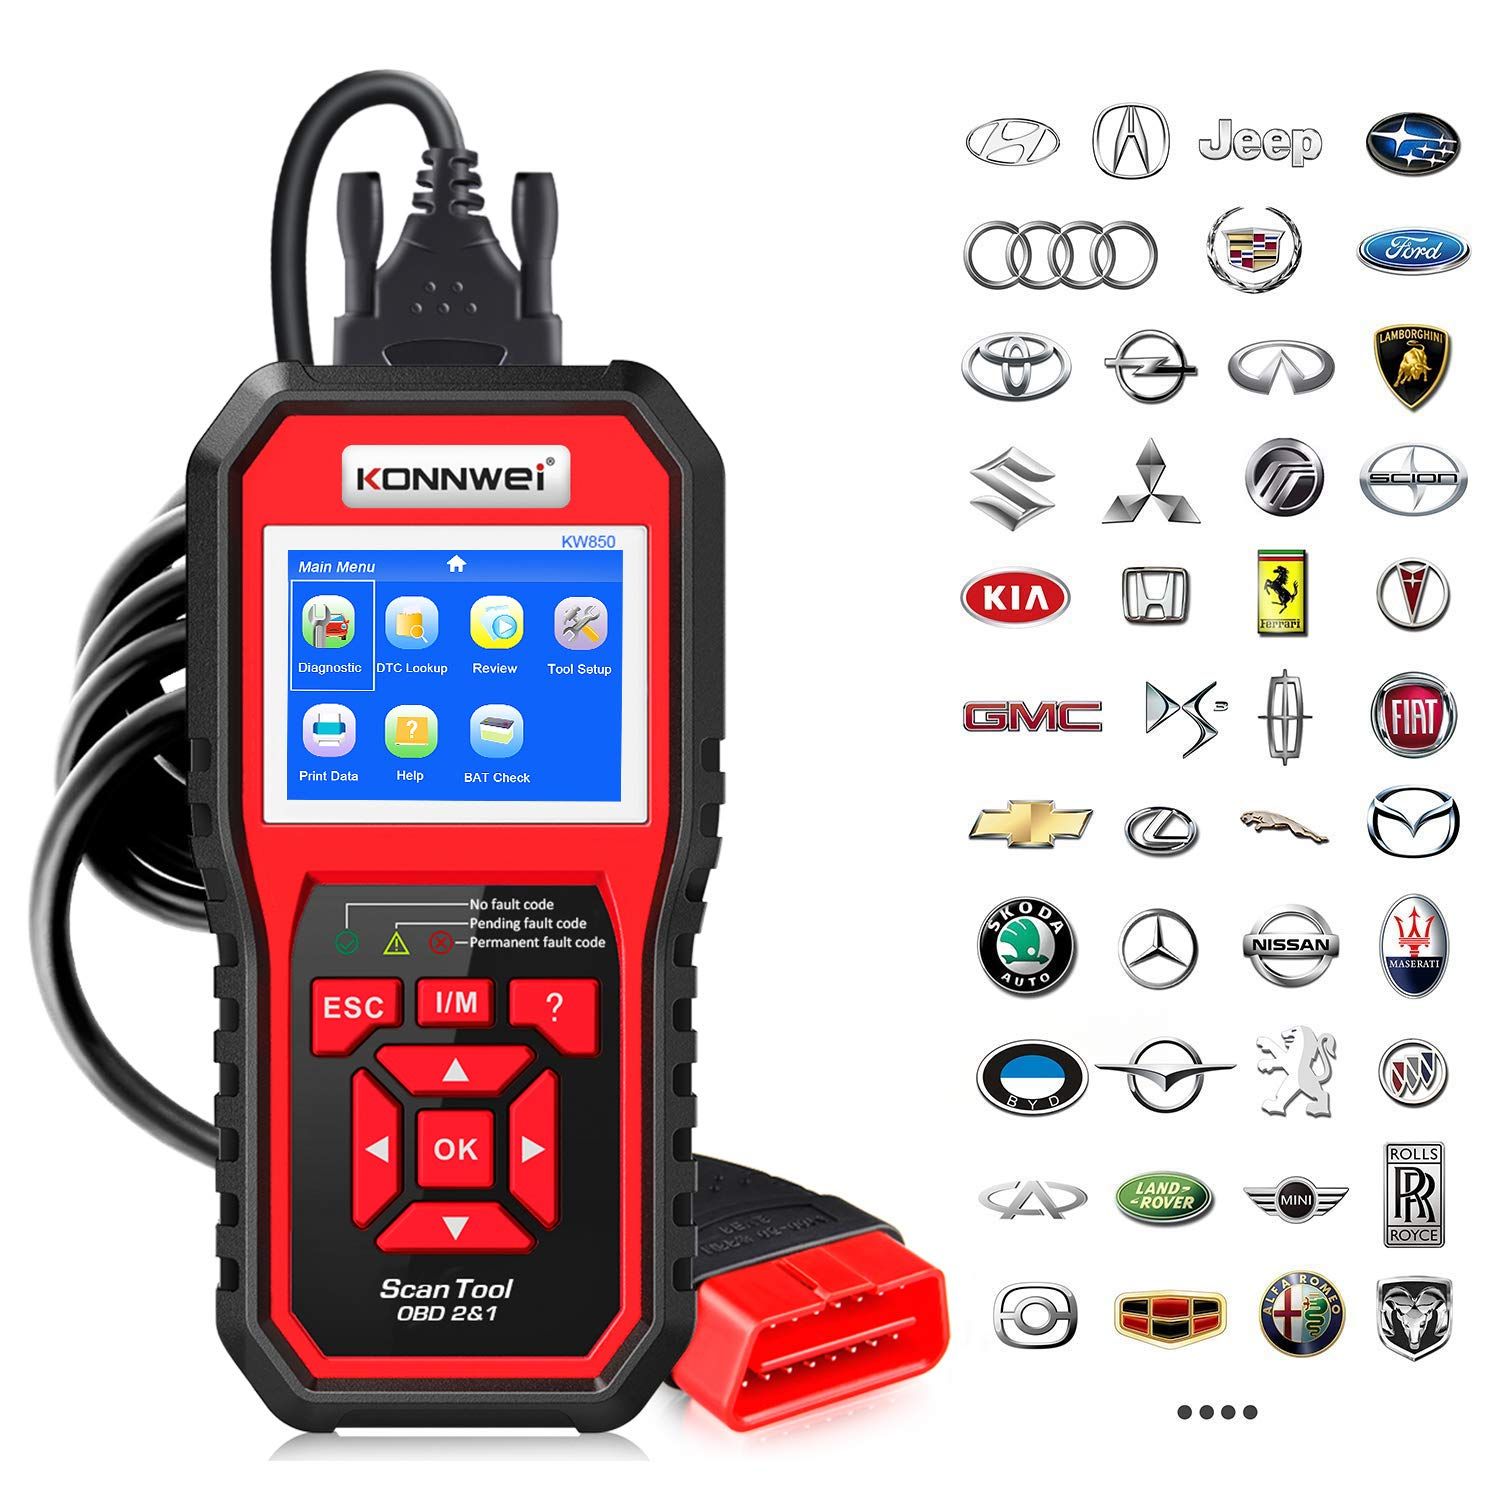 KONNWEI KW850 Professional OBD2 Scanner Auto Code Reader Diagnostic Check Engine Light Scan Tool for | Amazon (US)